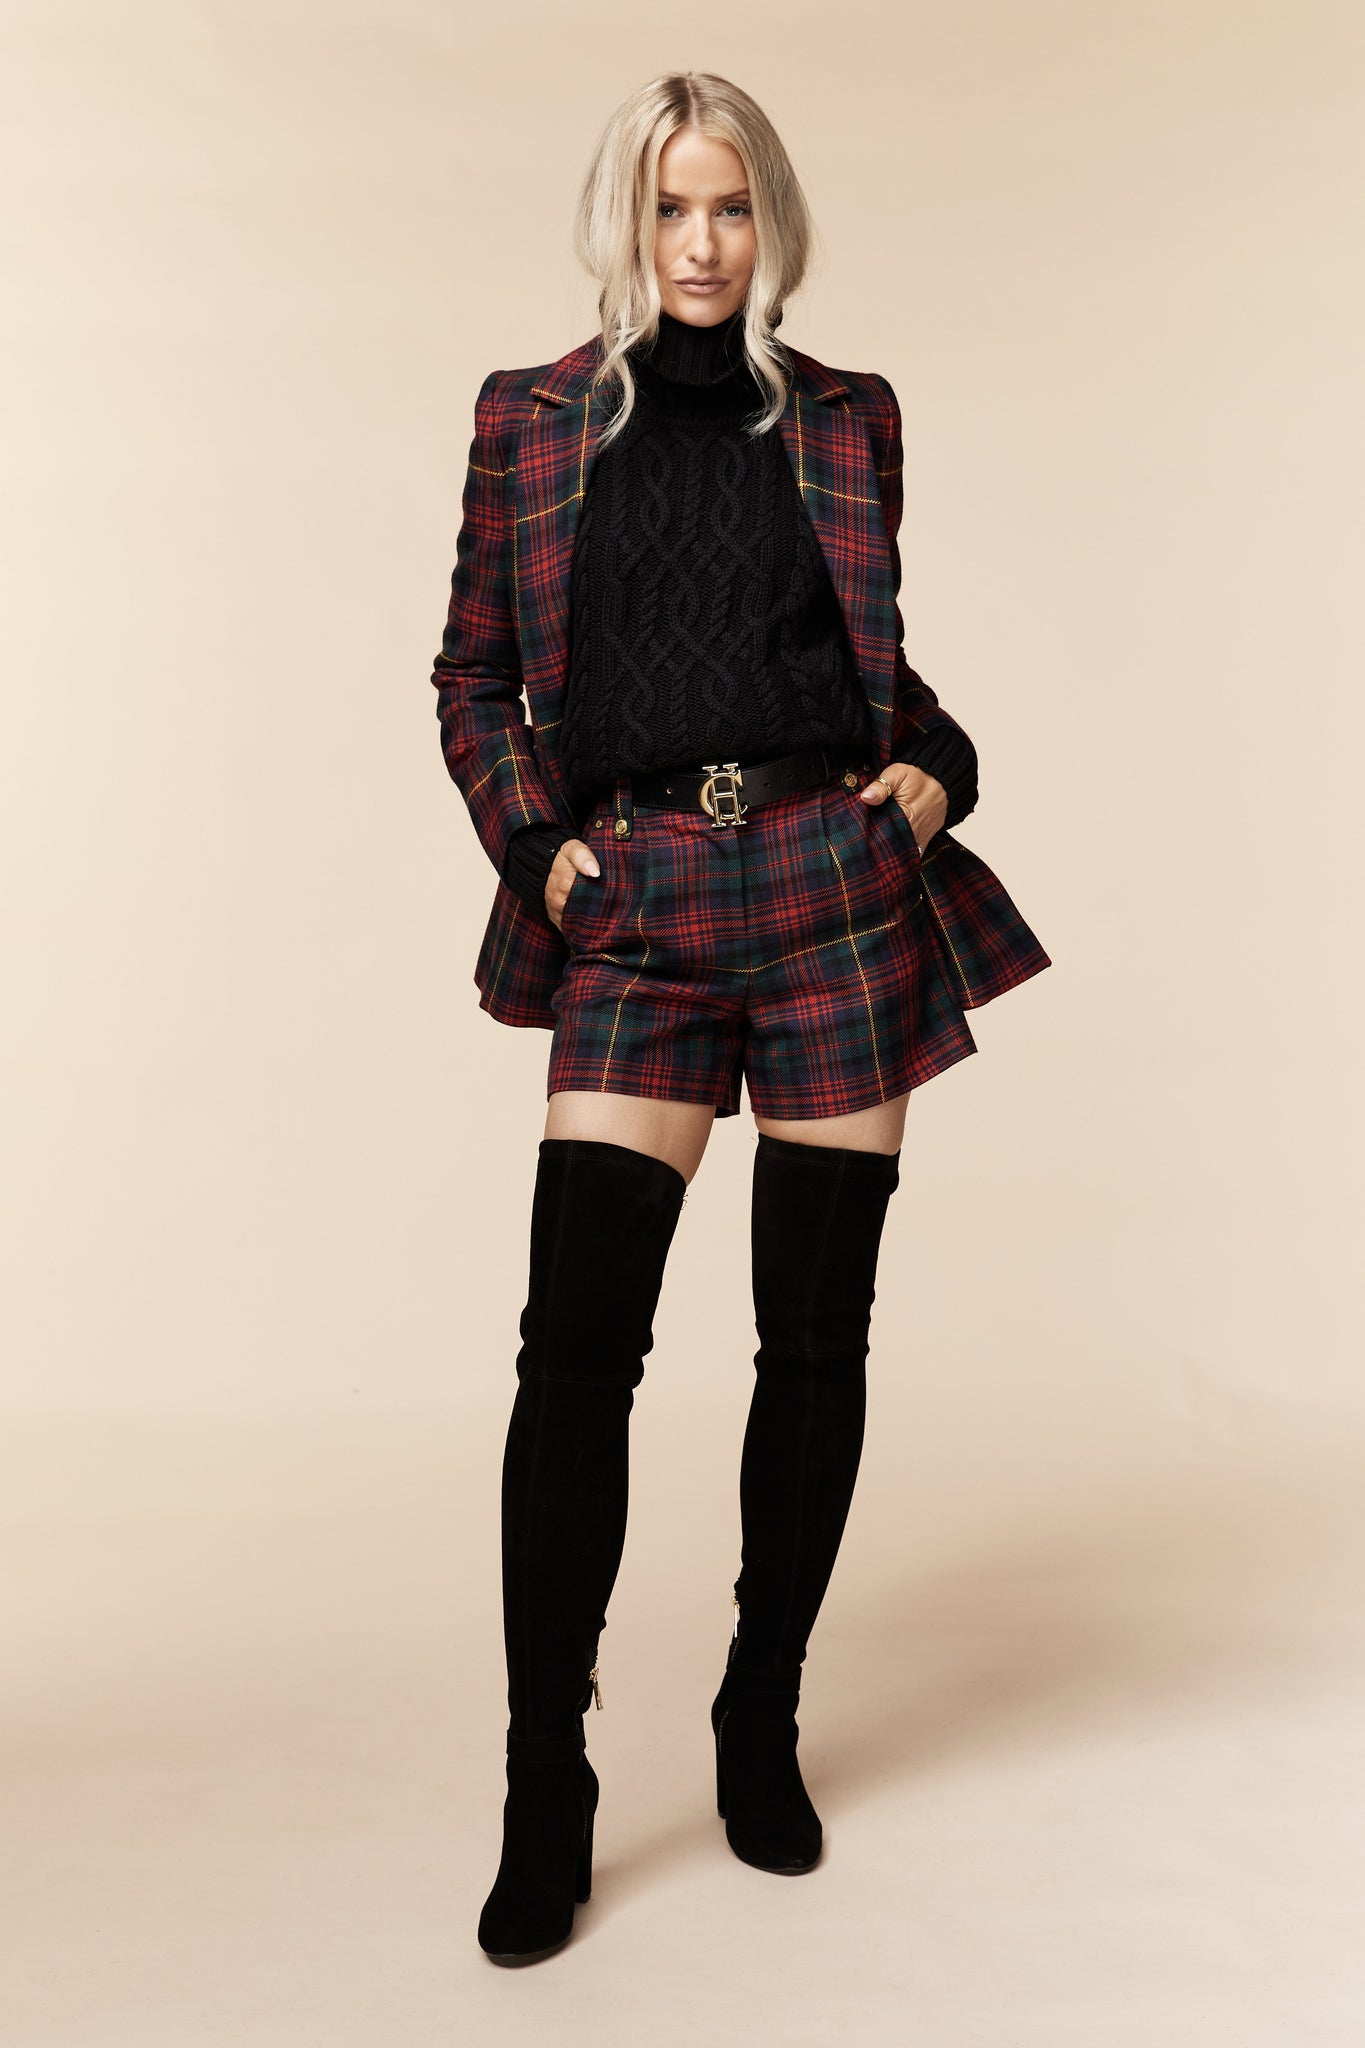 womens red green and blue tartan high rise tailored shorts with two single knife pleats and centre front zip fly fastening with twin branded gold stud buttons and side hip pockets with branded rivet detailing at top and bottom of pockets under matching double breasted blazer